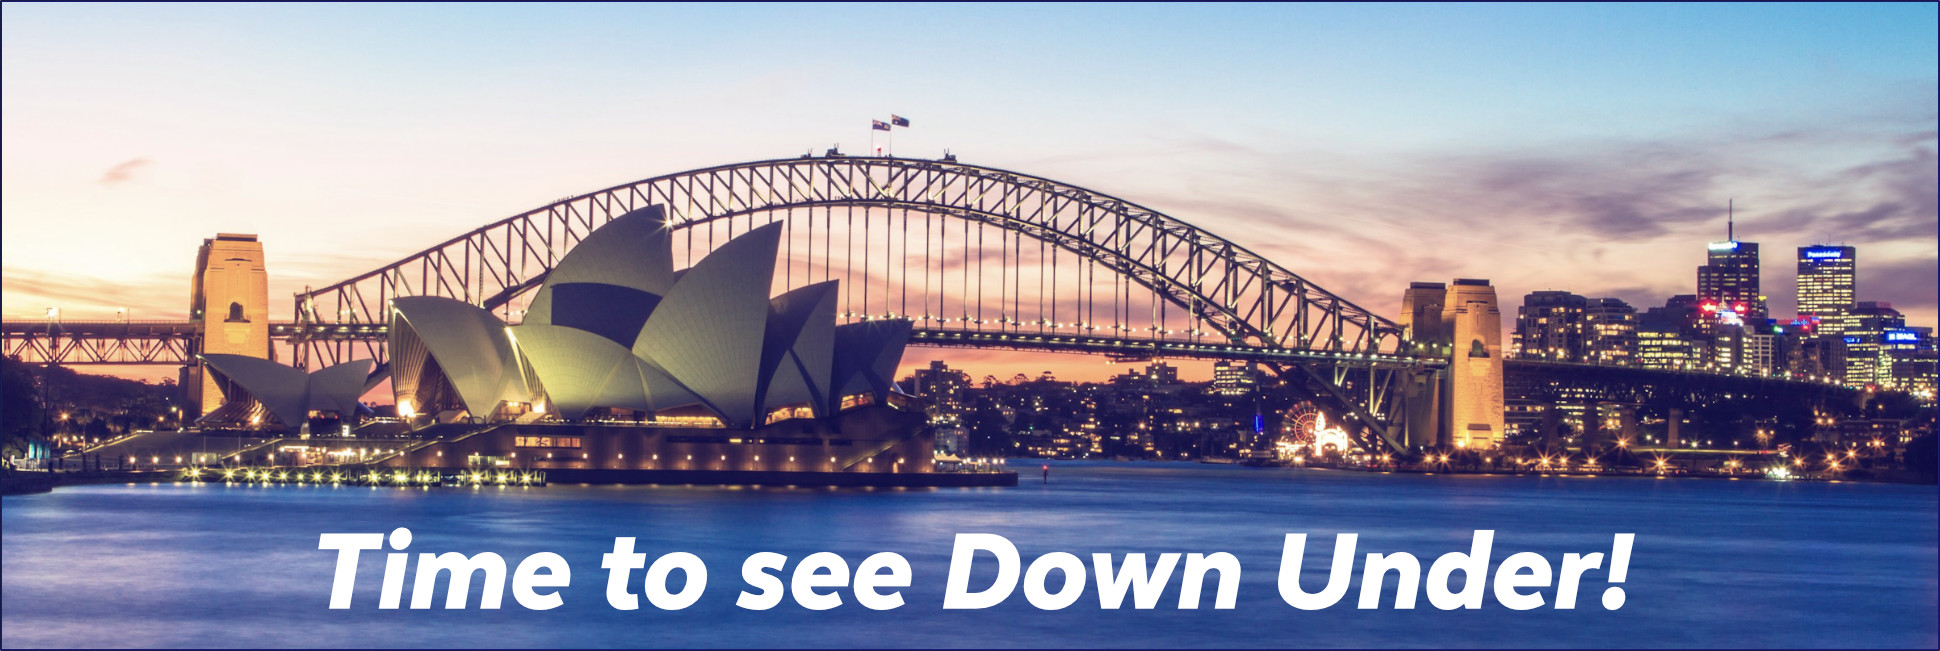 USA Eagles Tours - Time to see Down Under!